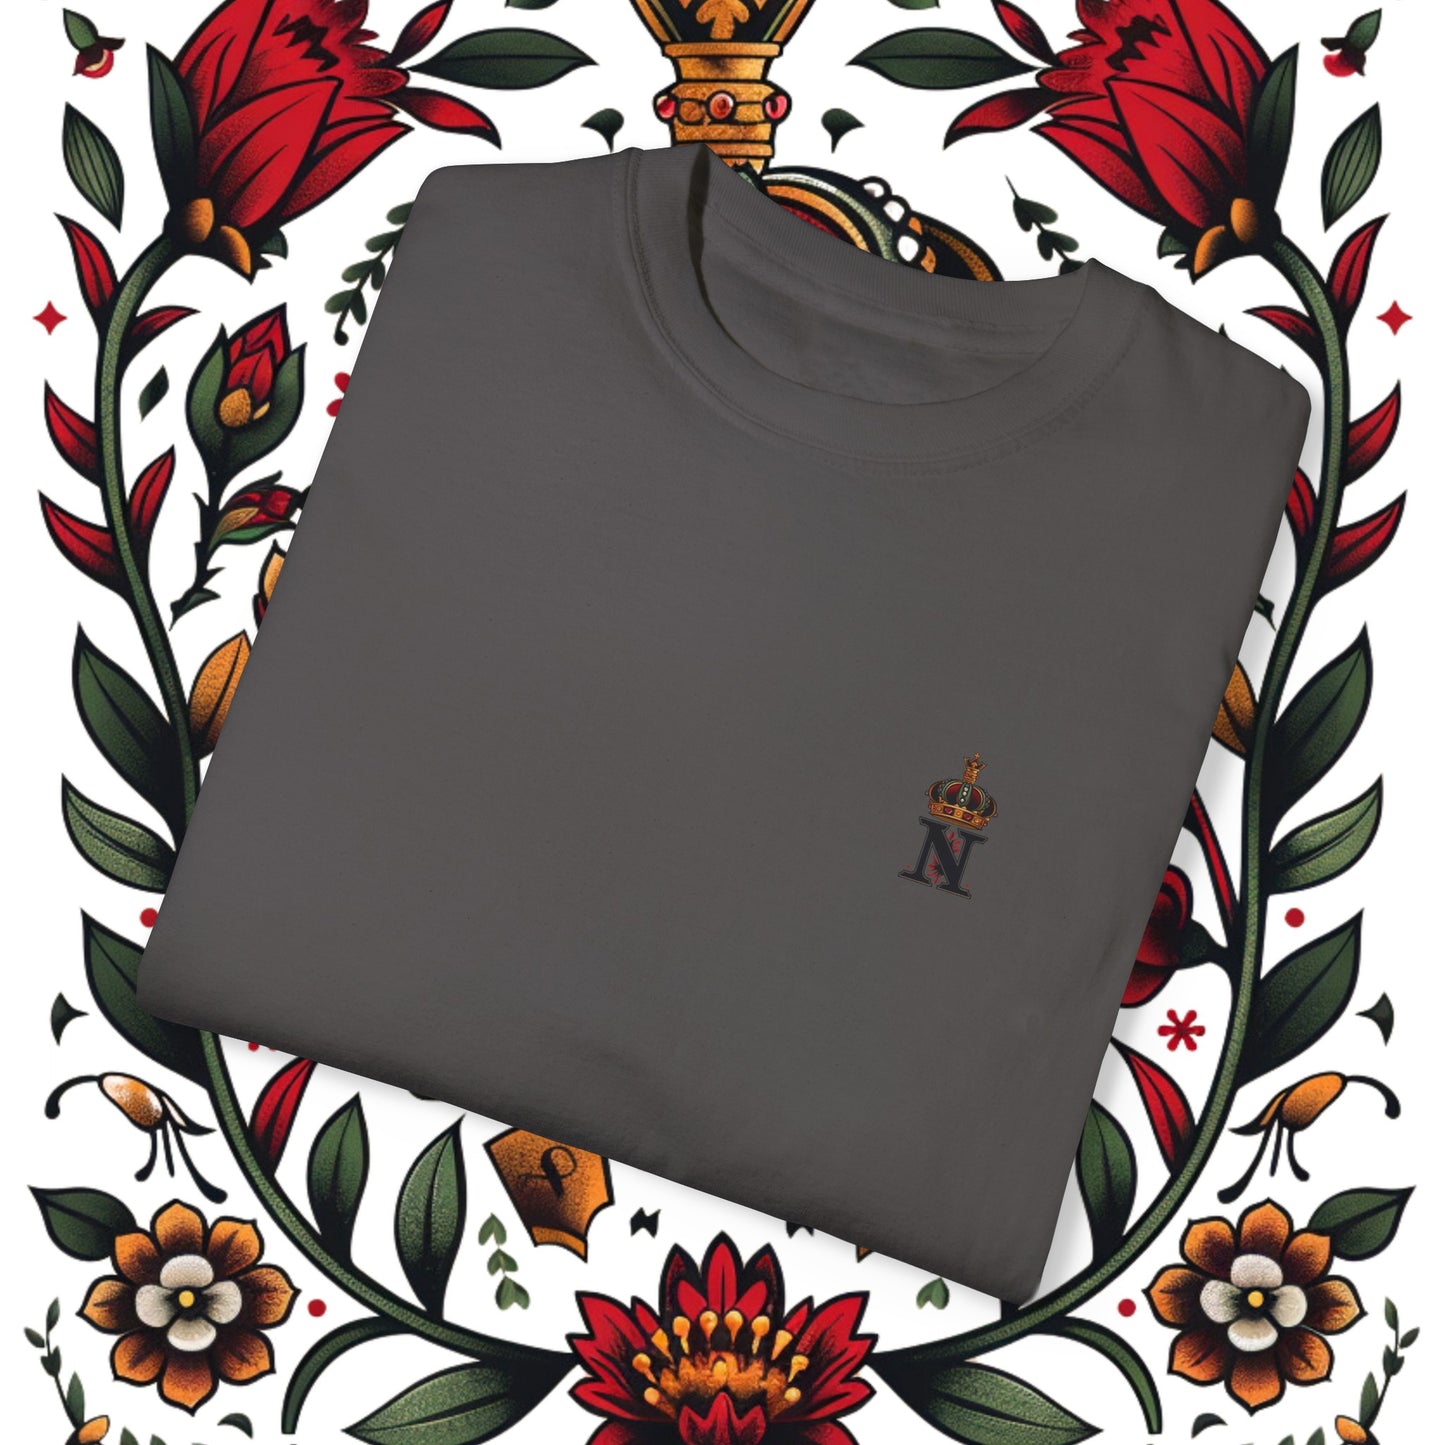 Noble Tattoo Crown T-shirt